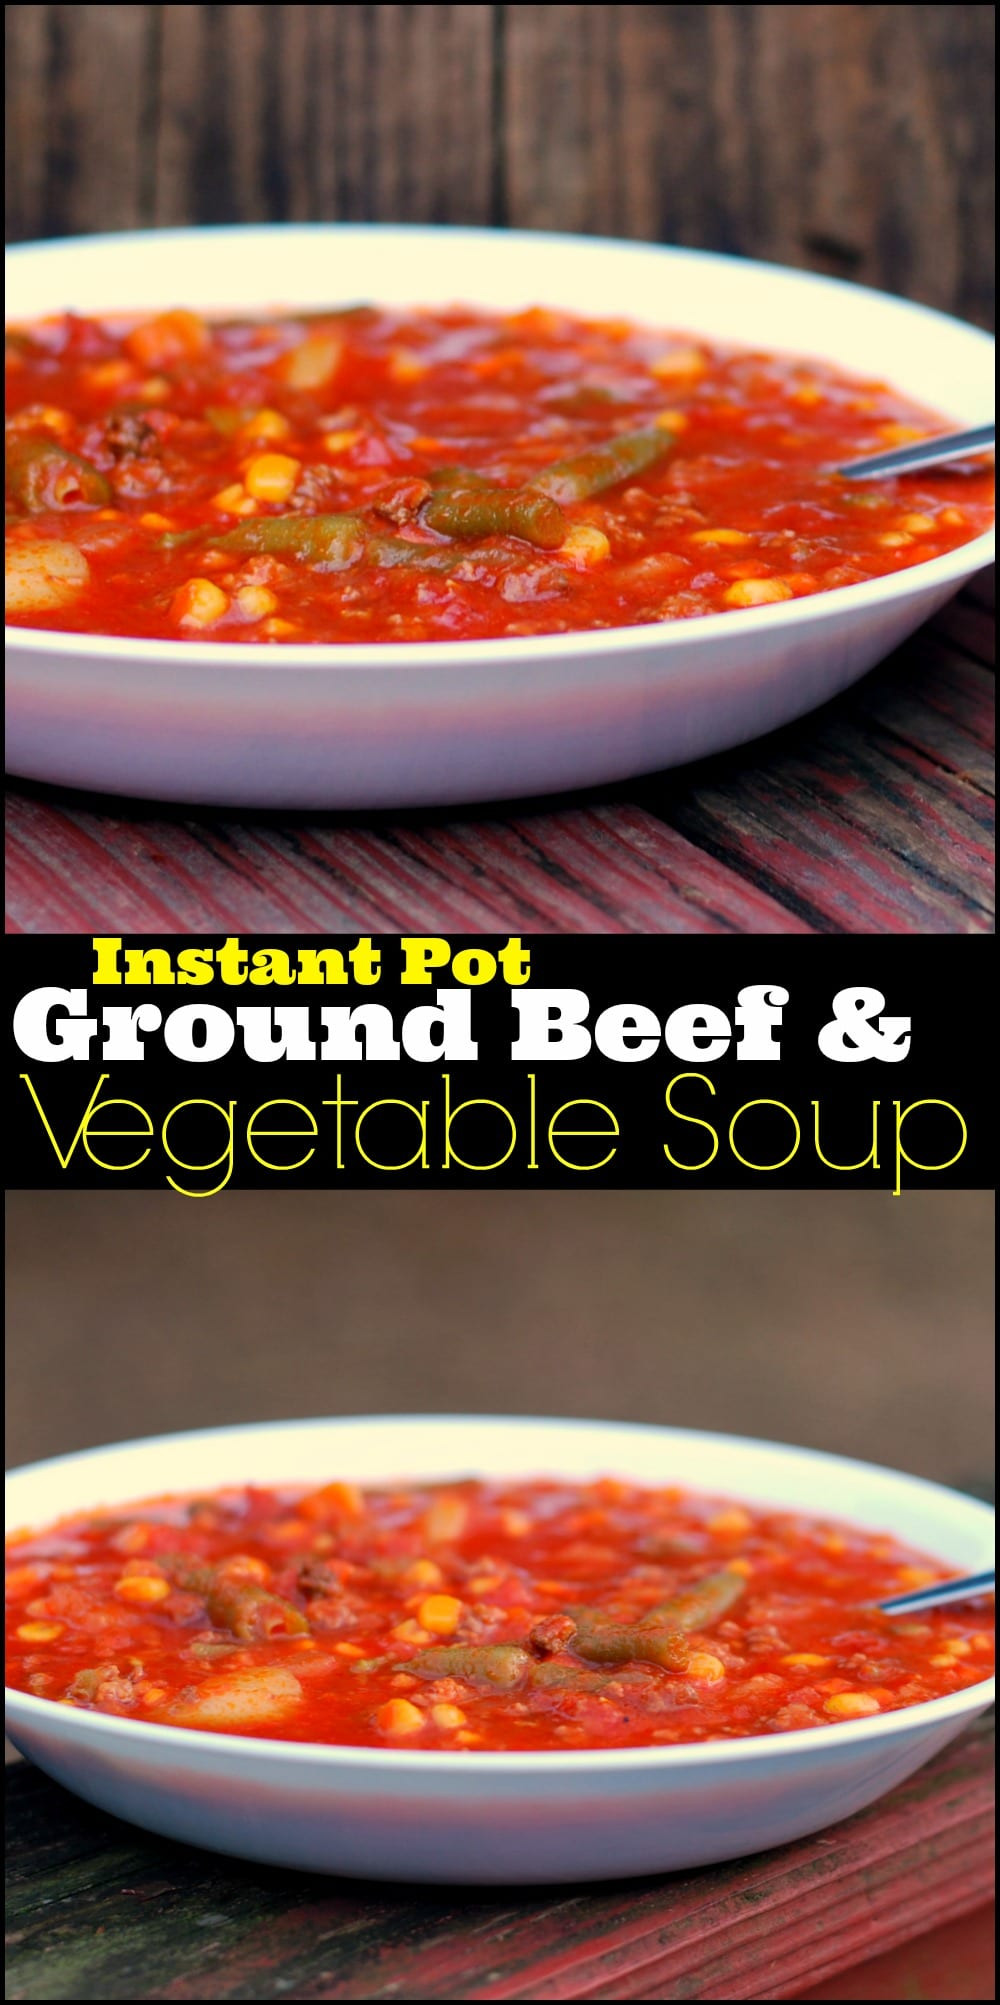 Vegetable Beef Soup Instant Pot
 Instant Pot Ground Beef & Ve able Soup Aunt Bee s Recipes